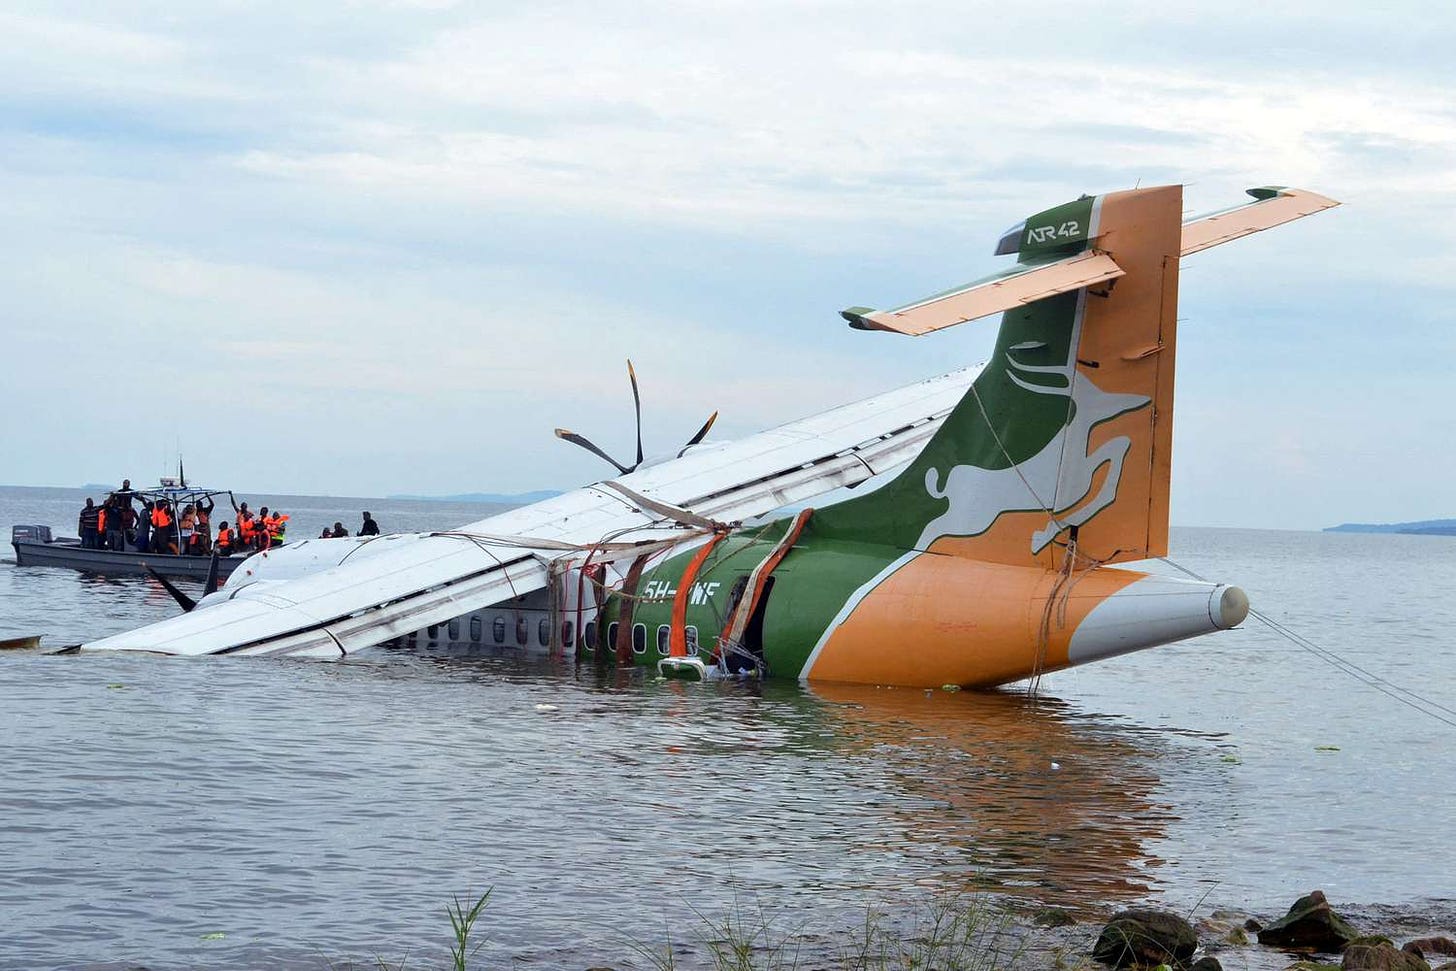 Tanzania: government criticised for response to a plane crash in Lake Victoria that left 19 dead, including the pilots.